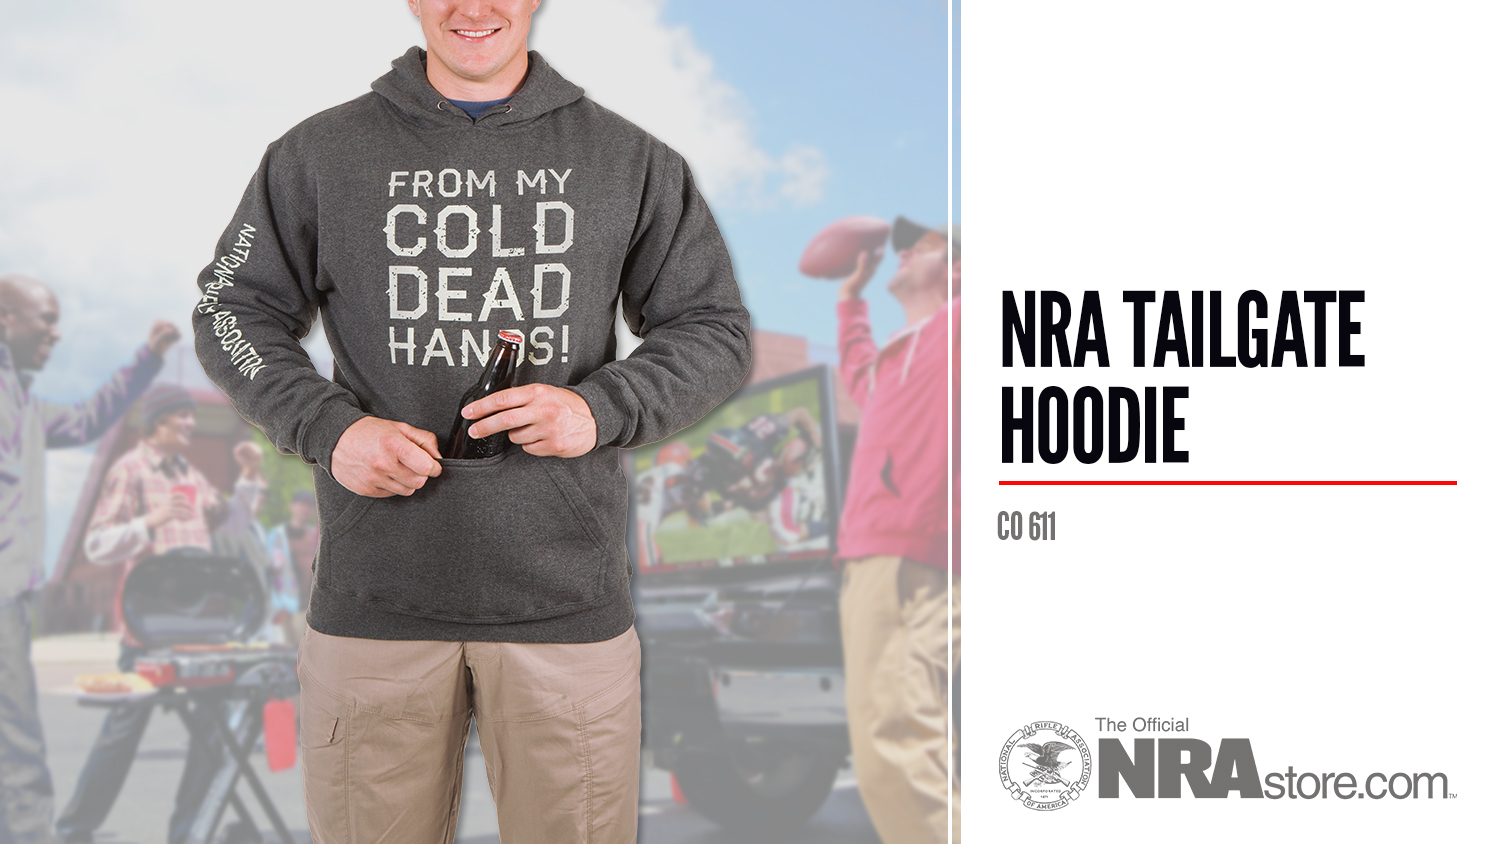 NRAstore Product Highlight: Tailgate Hoodie